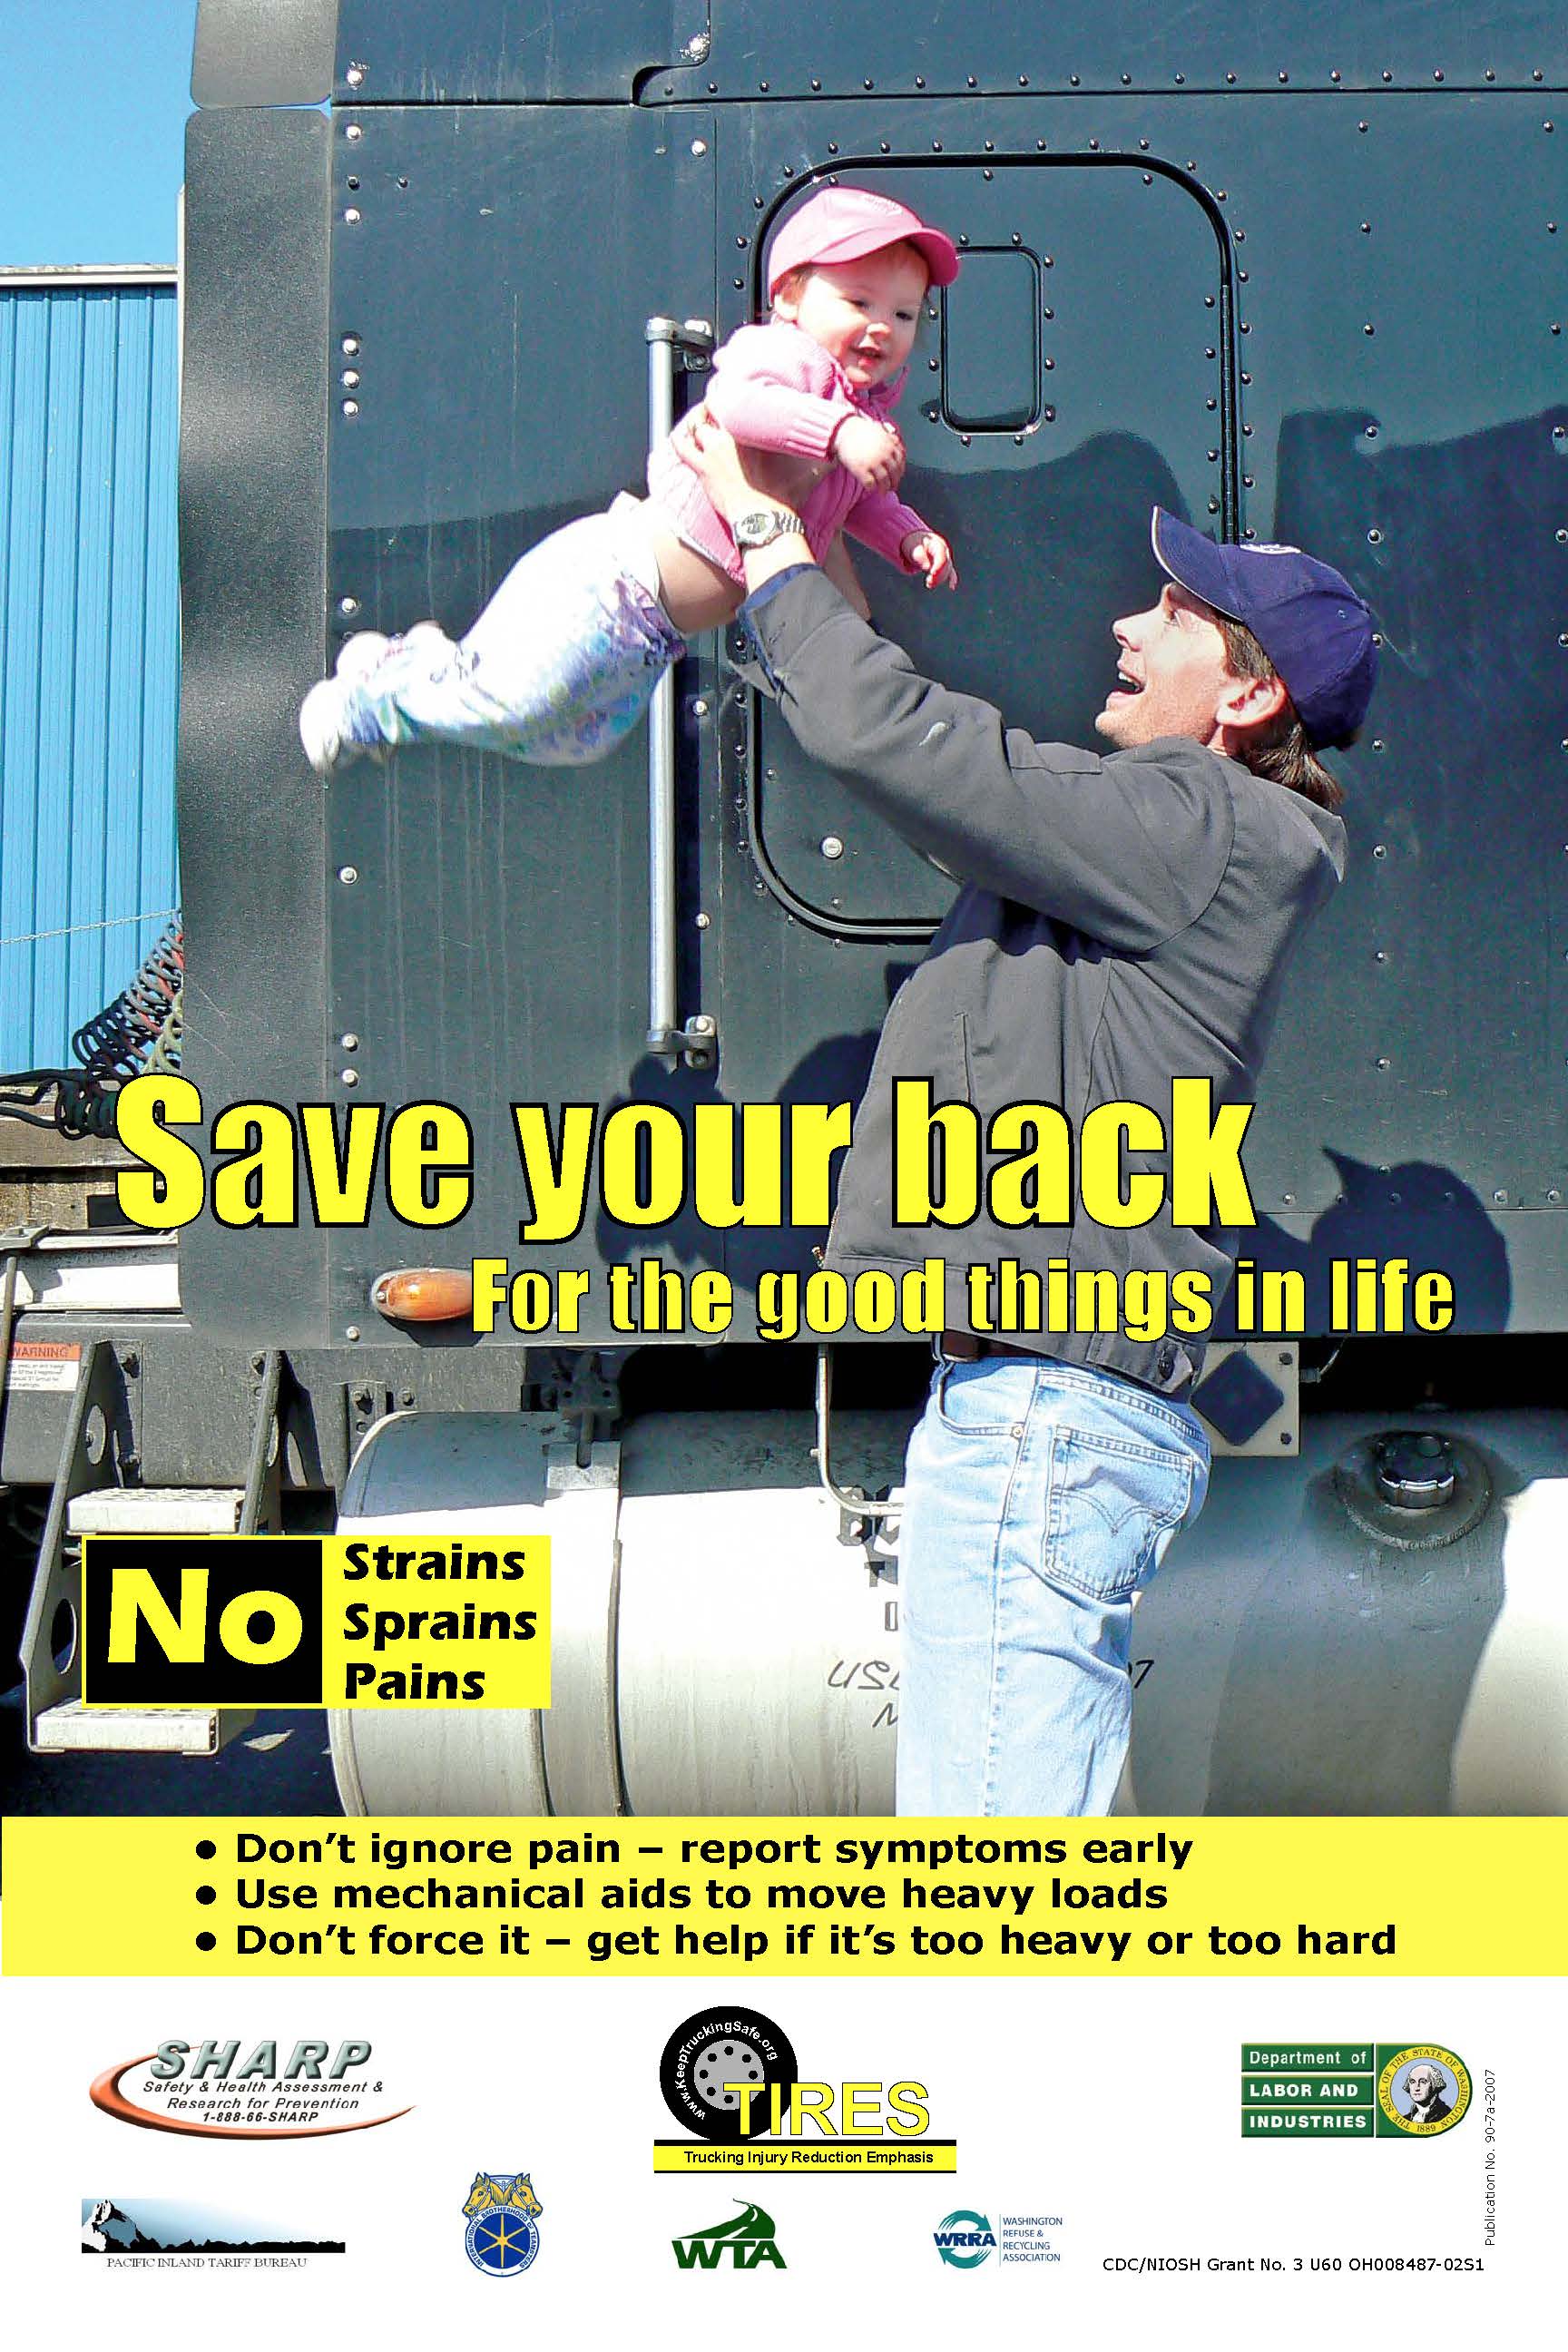 image of a man lifting a baby above his head with a warning about lifting safely to save your back for the good things in life.